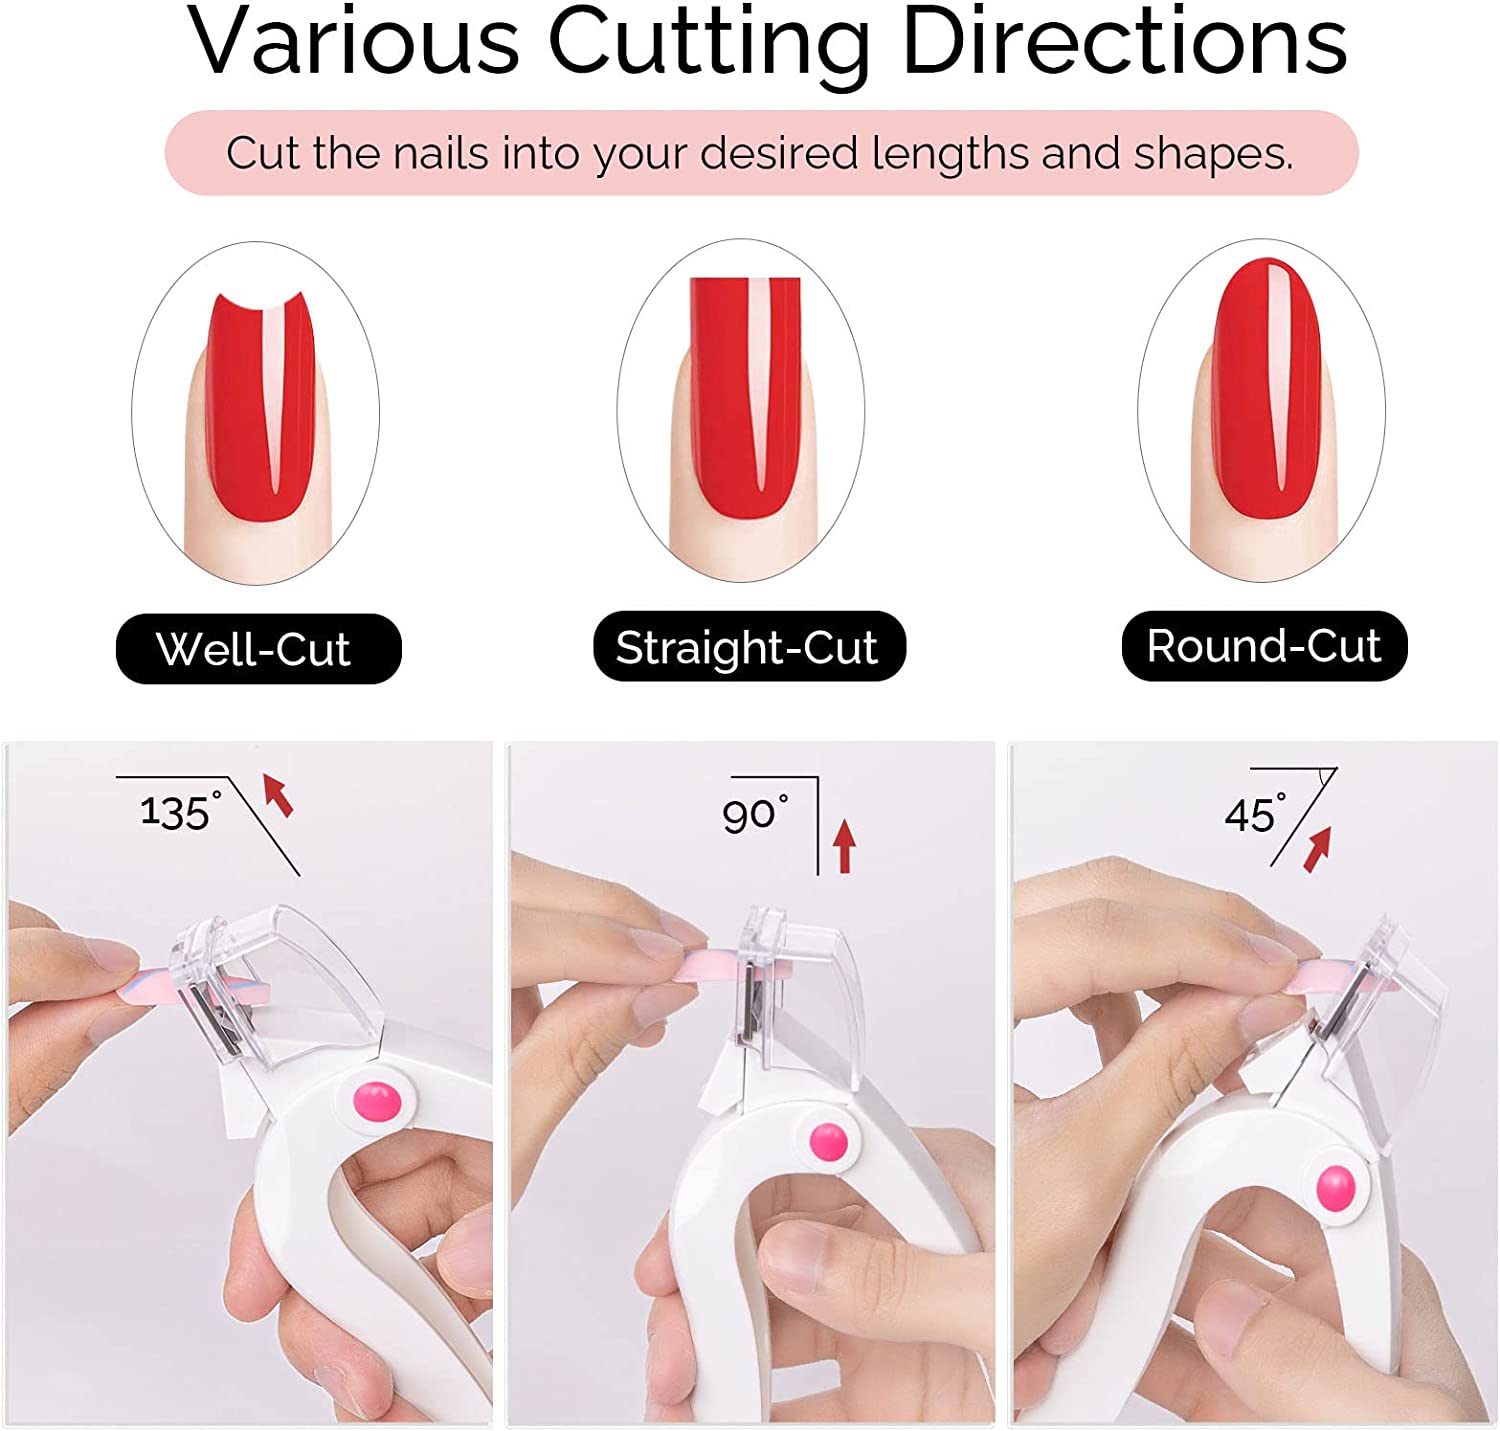 How to Cut Nails With and Without Clippers